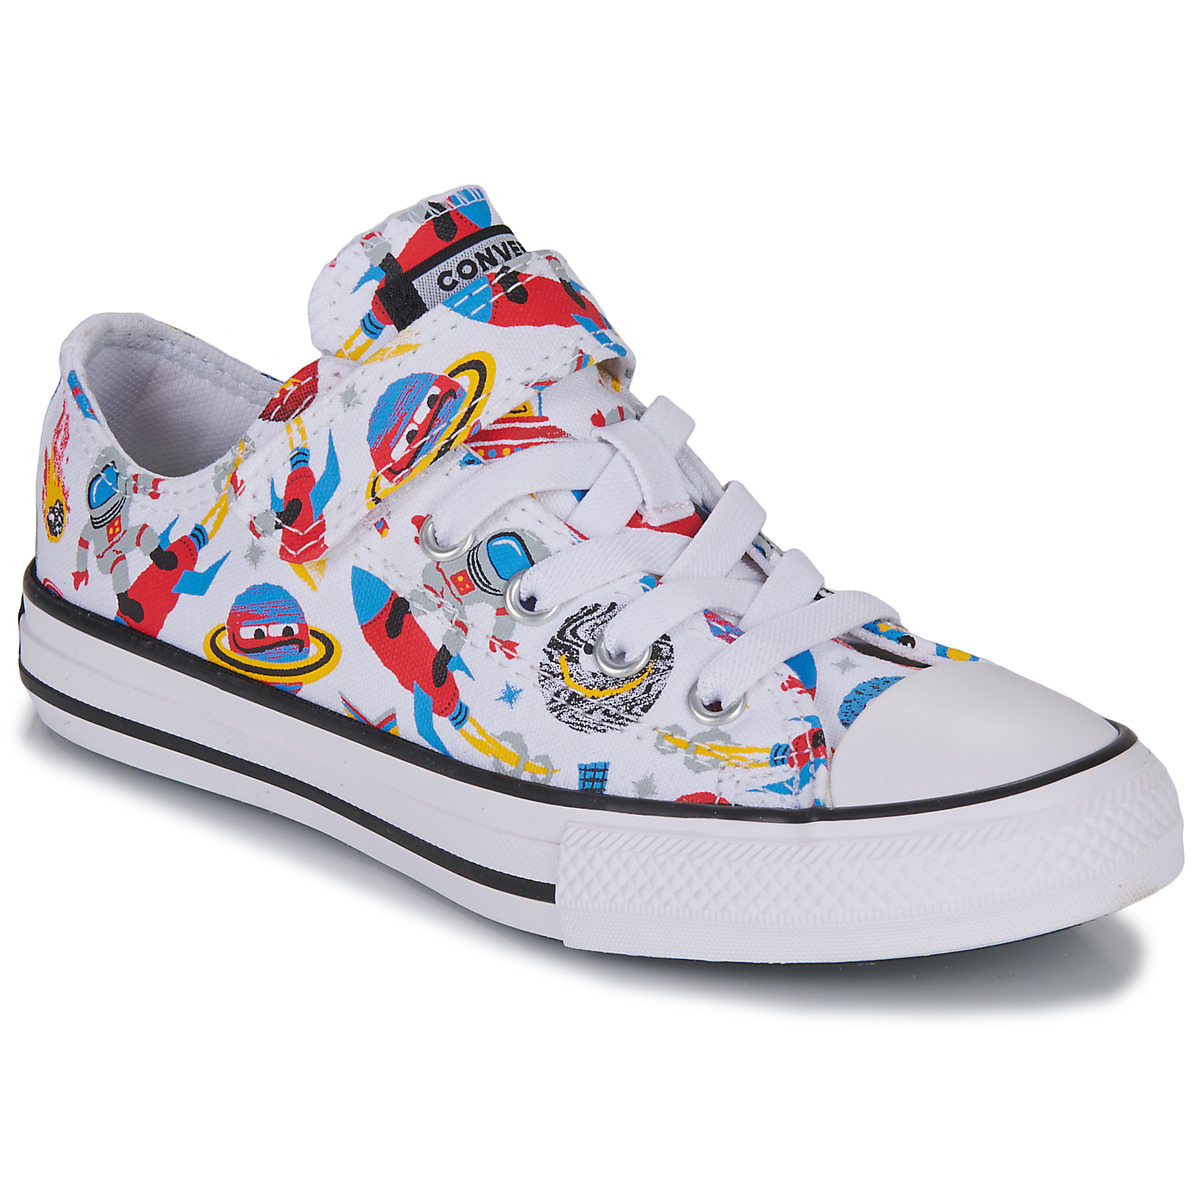 Converse Multicolore CHUCK TAYLOR ALL STAR 1V EASY-ON SPACE CRUISER OX jeOEdUir